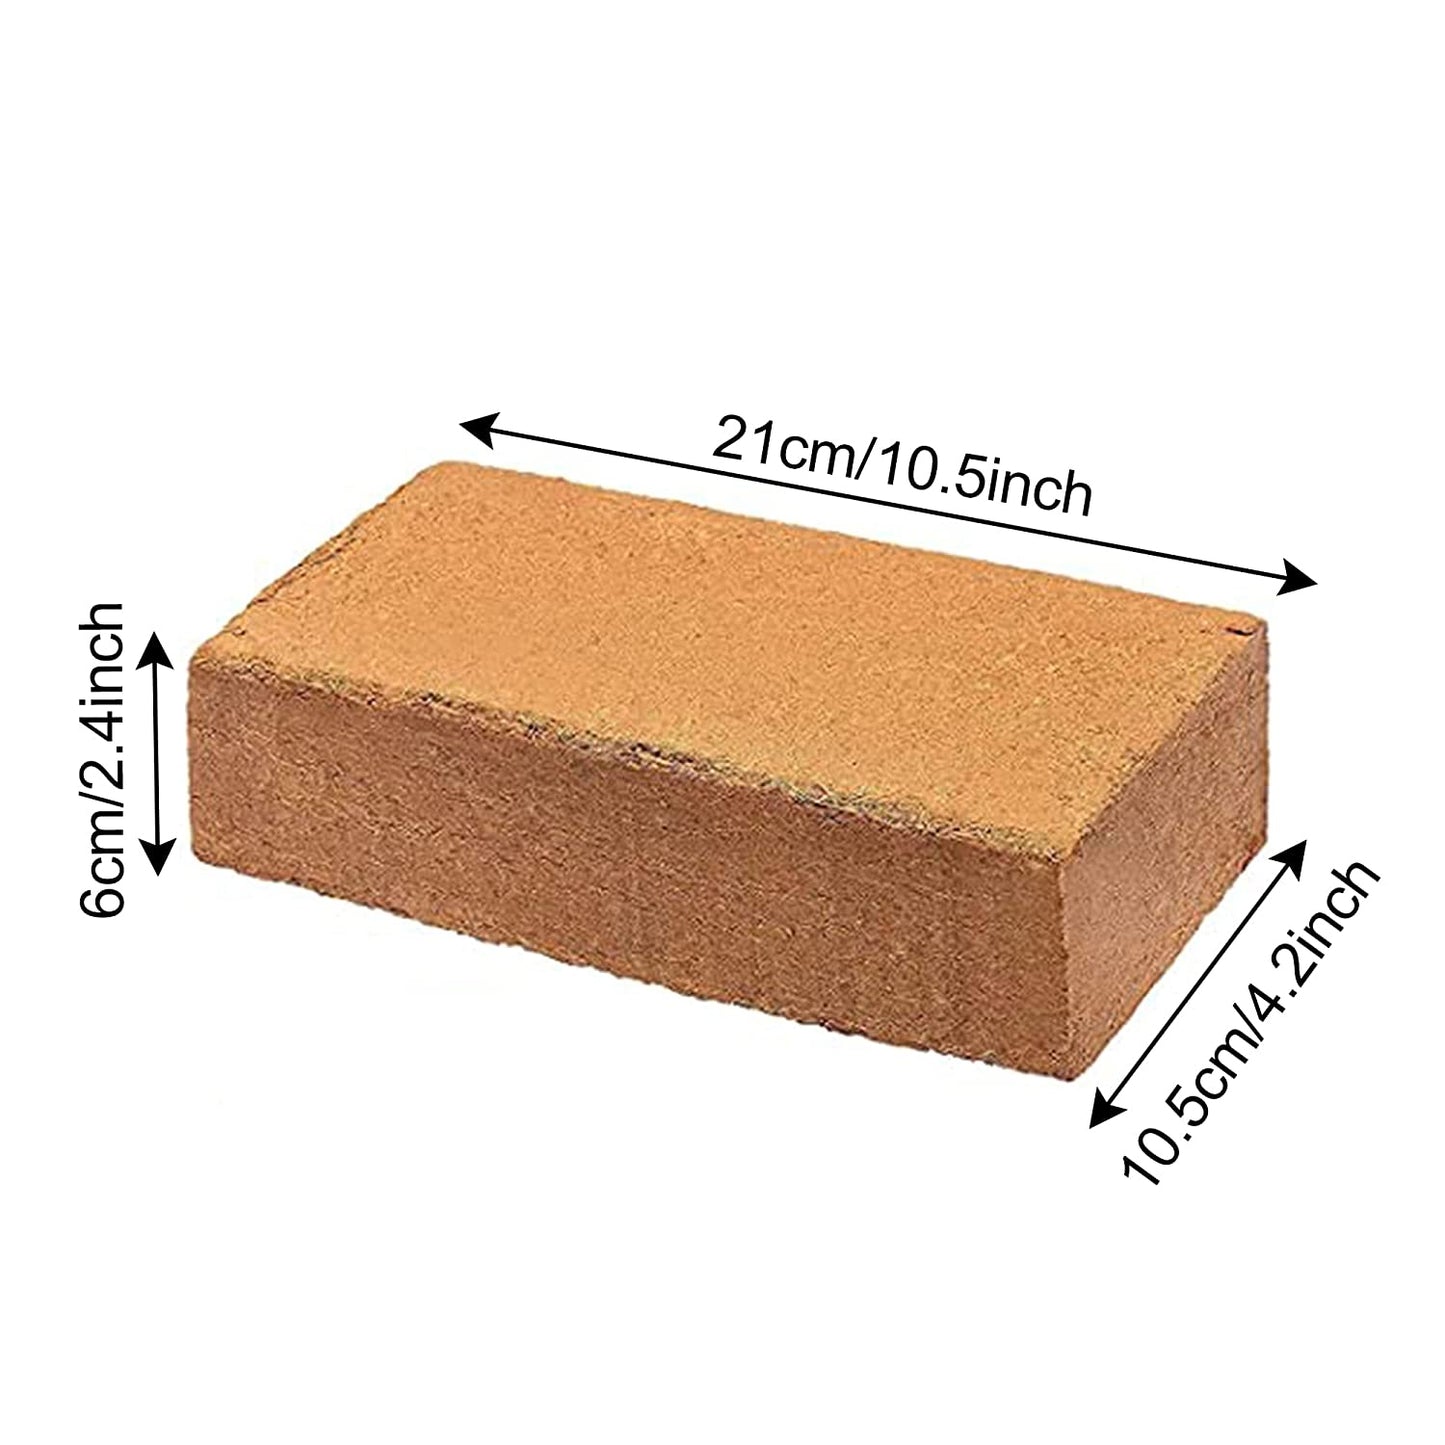 Casa De Amor Organic Cocopeat Brick (650gm) Gardening Medium for Strong Plant Growth | Lightweight & Expandable | High Water-Holding Capacity | Ideal for All Plants | Expands to 4 kg Powder